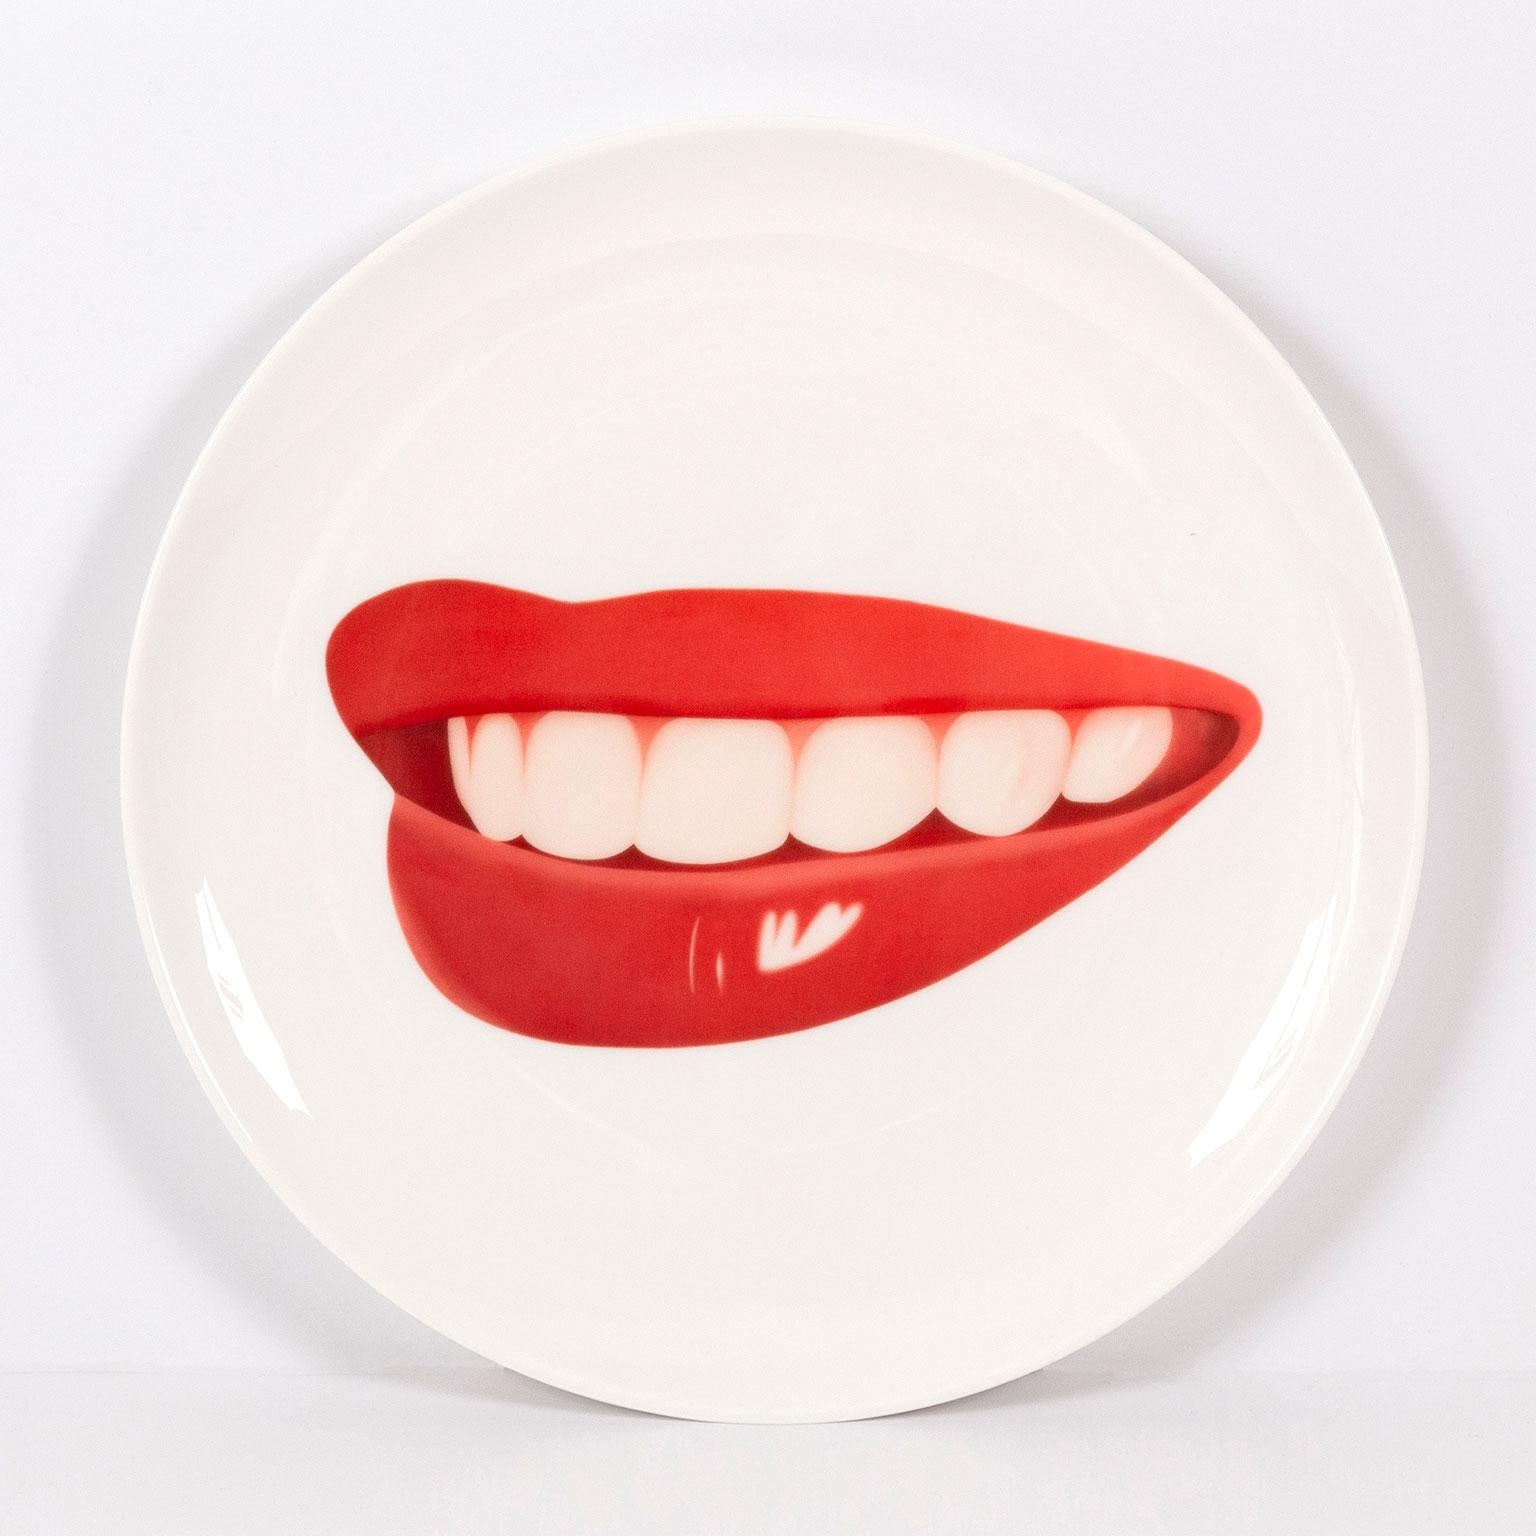 Mouth #2 - Art by Tom Wesselmann